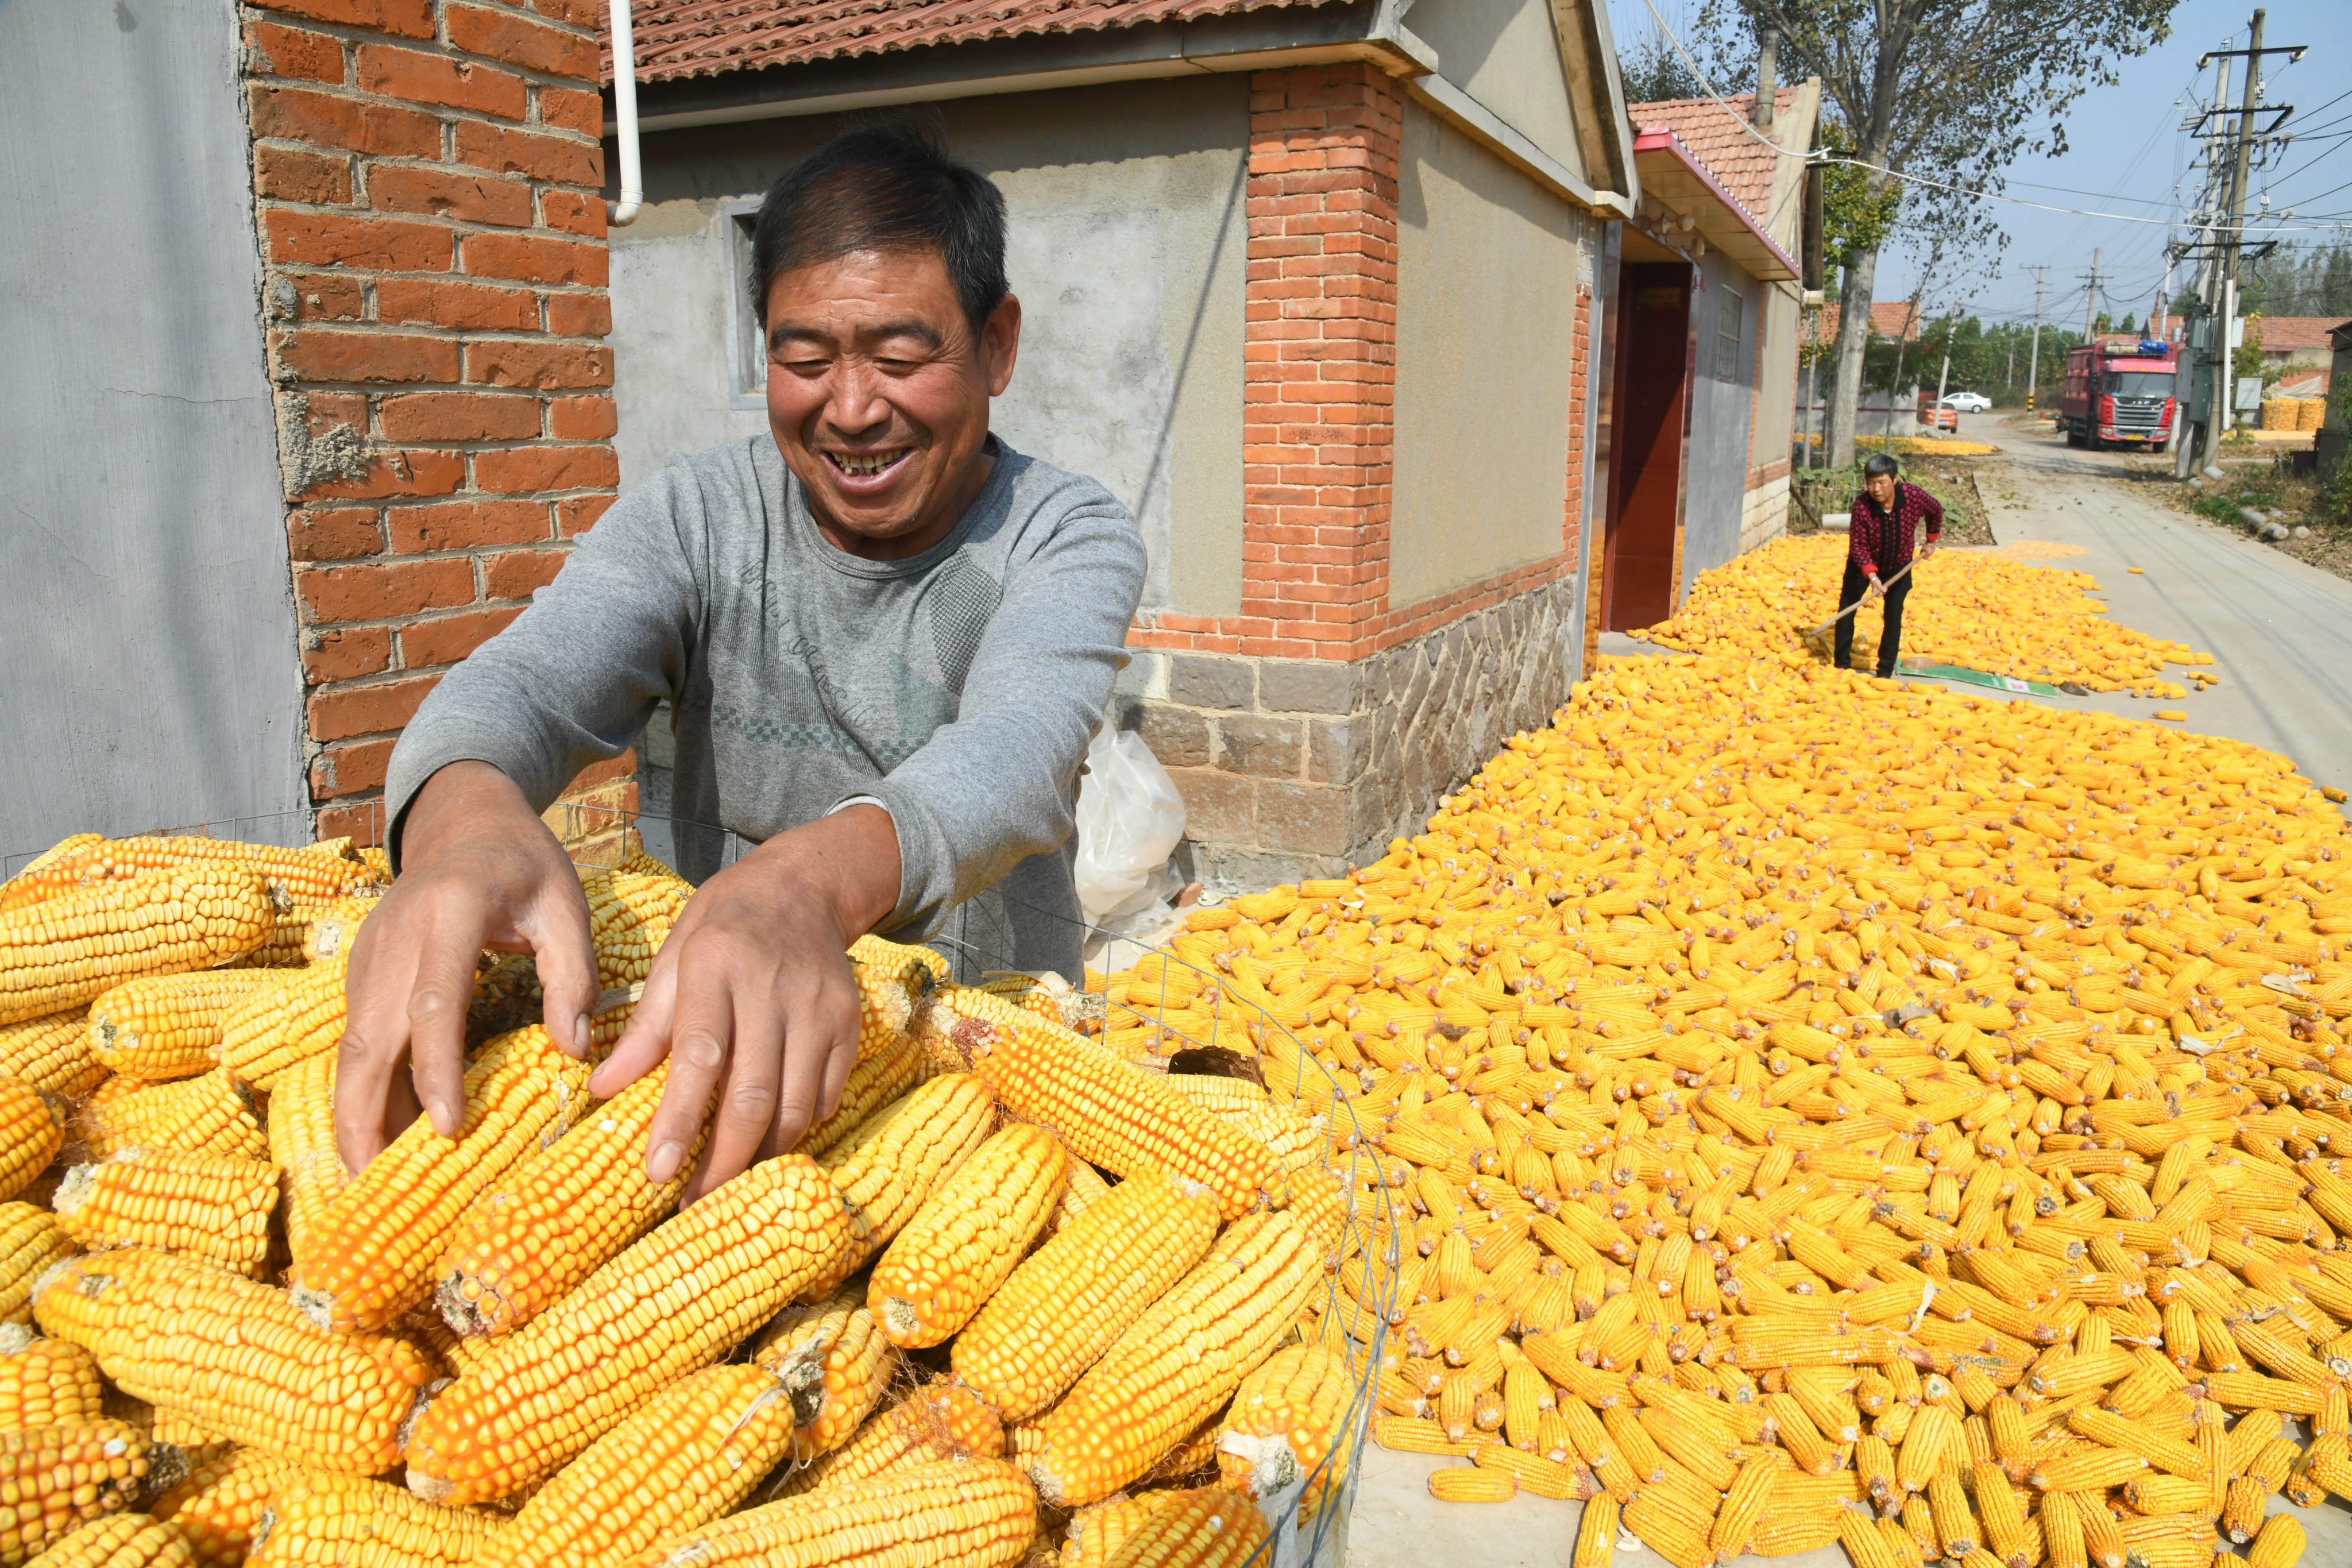 While people in 161 countries eat corn, this is markedly more common in low and lower-middle income countries and in Africa. Photo: Xinhua